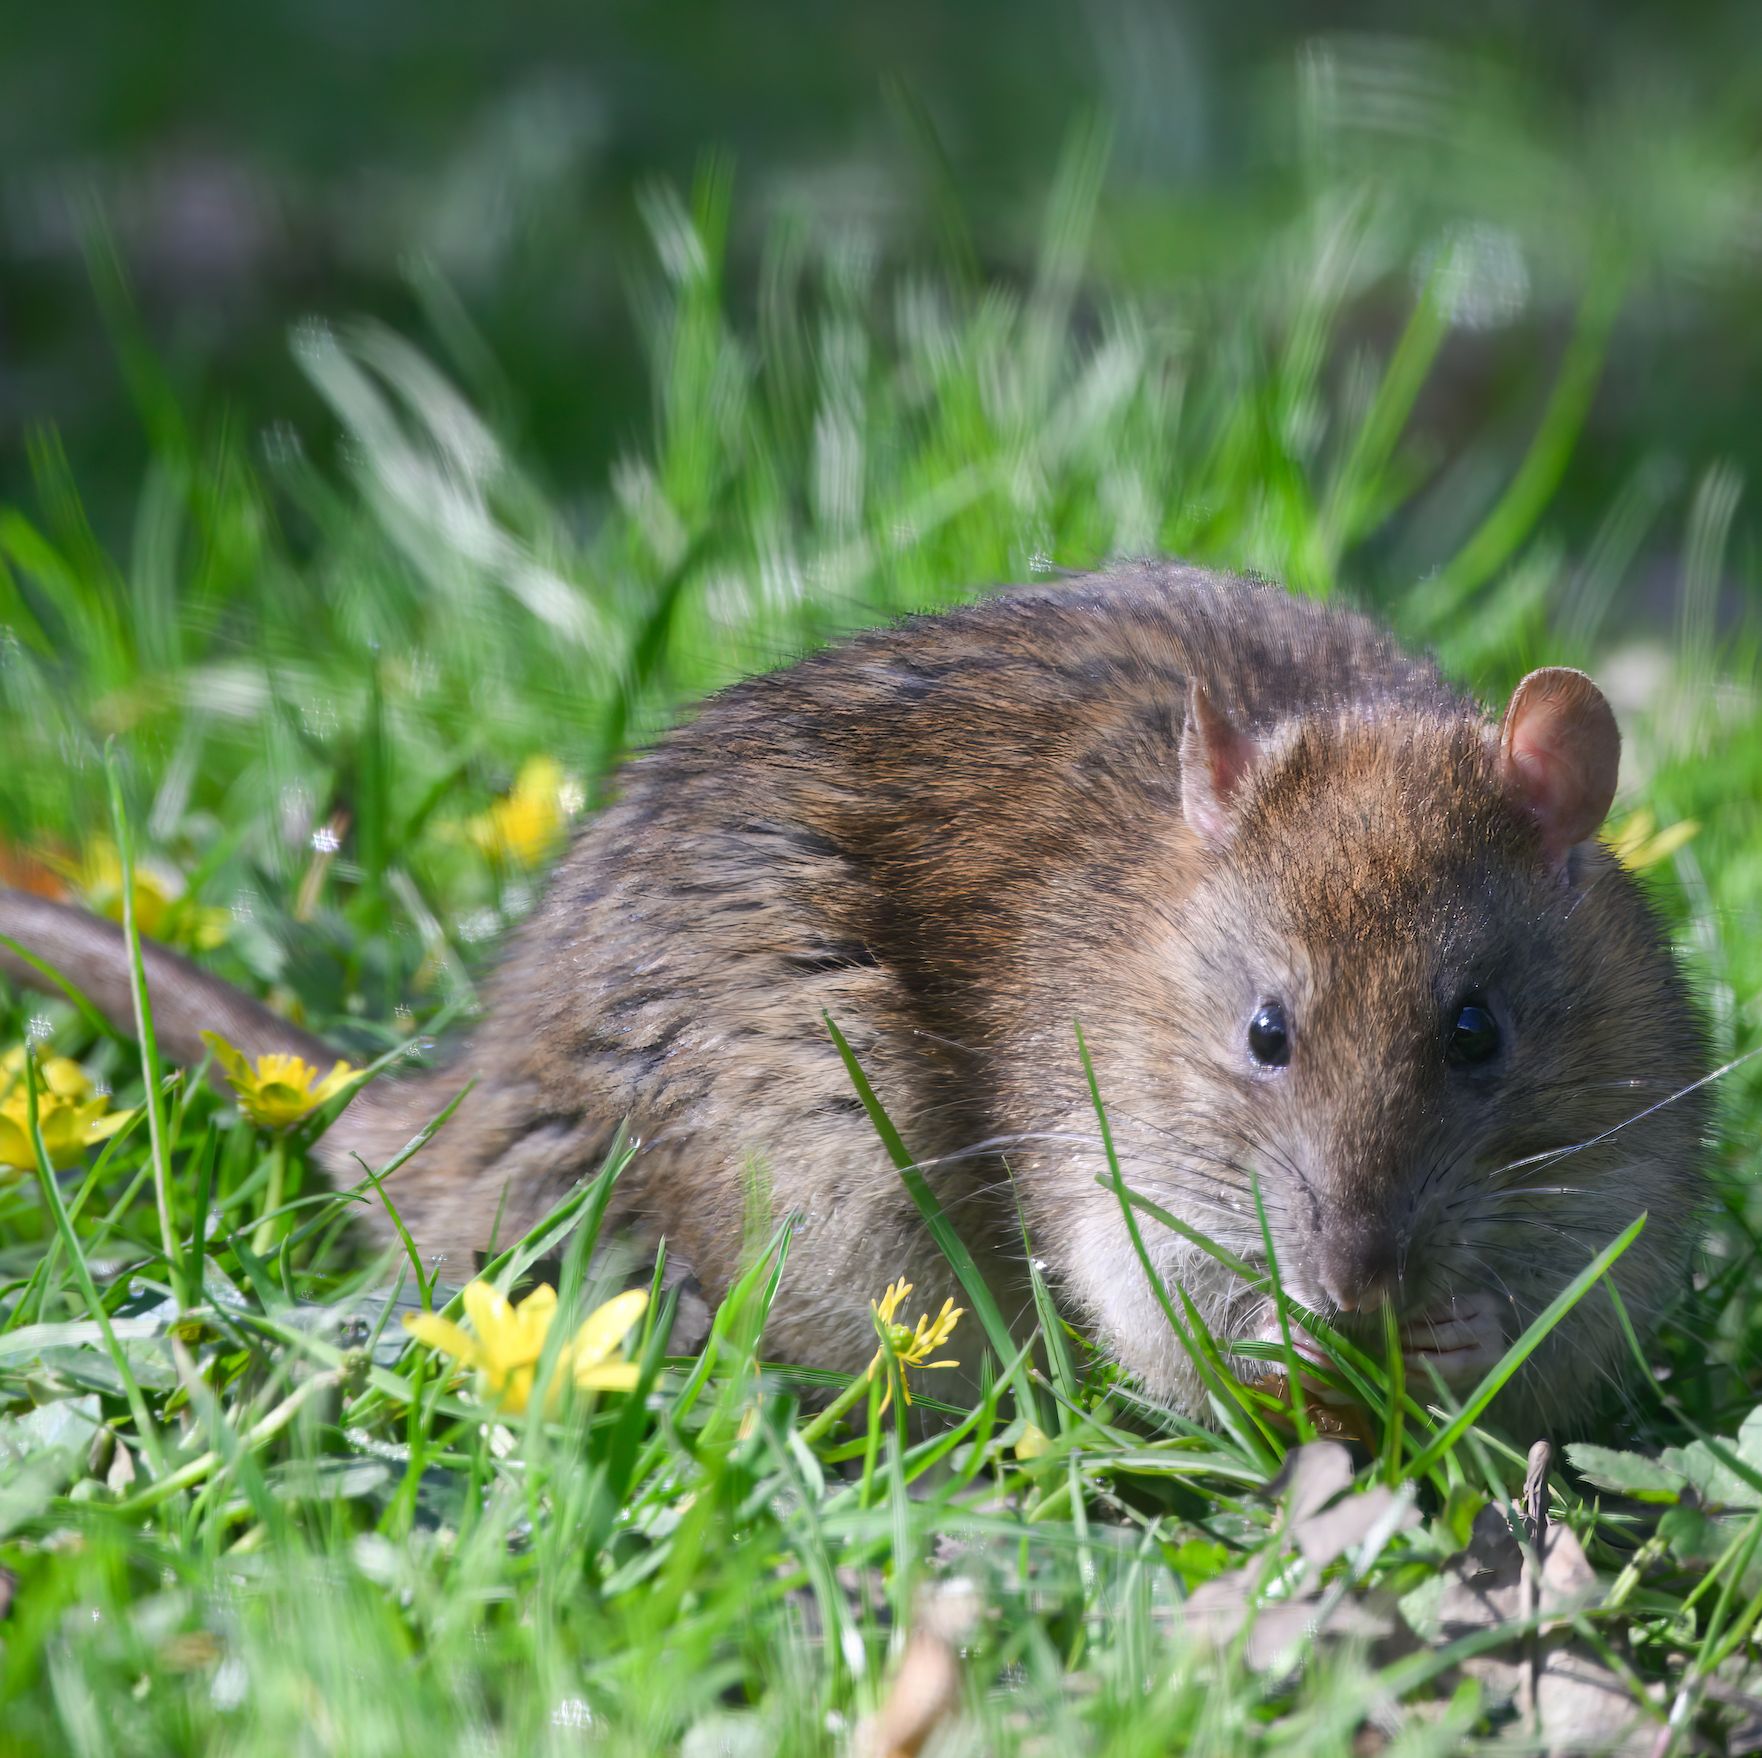 Humane Rat Traps Can Help Protect a Home